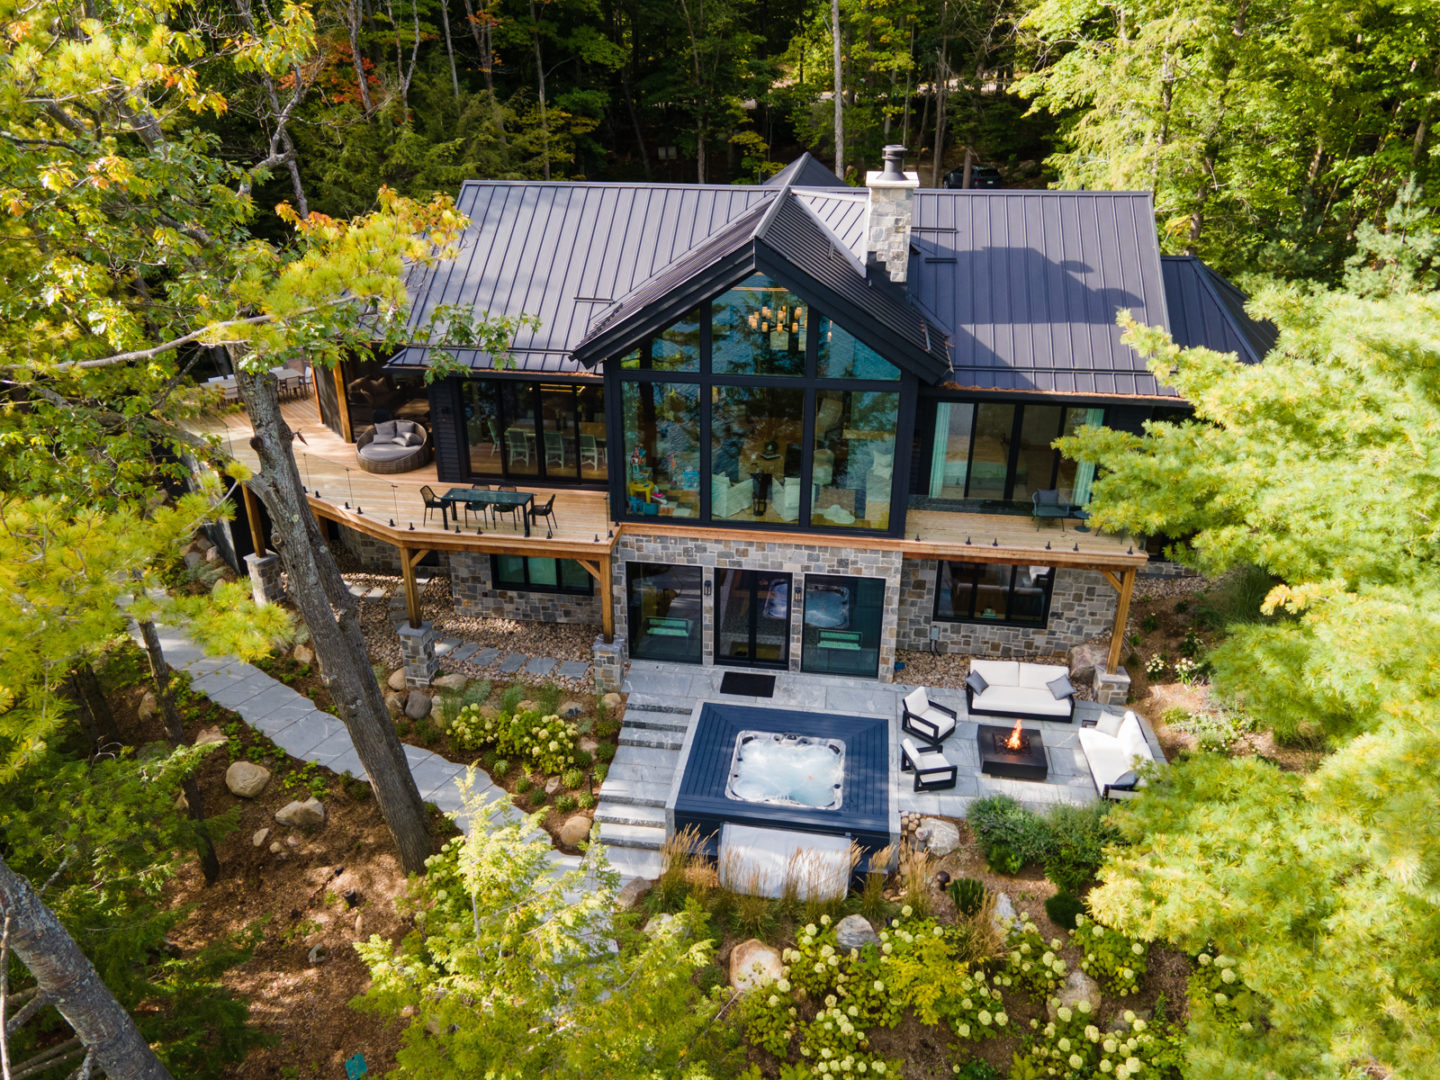 Overhead view showing cottage and entertaining area